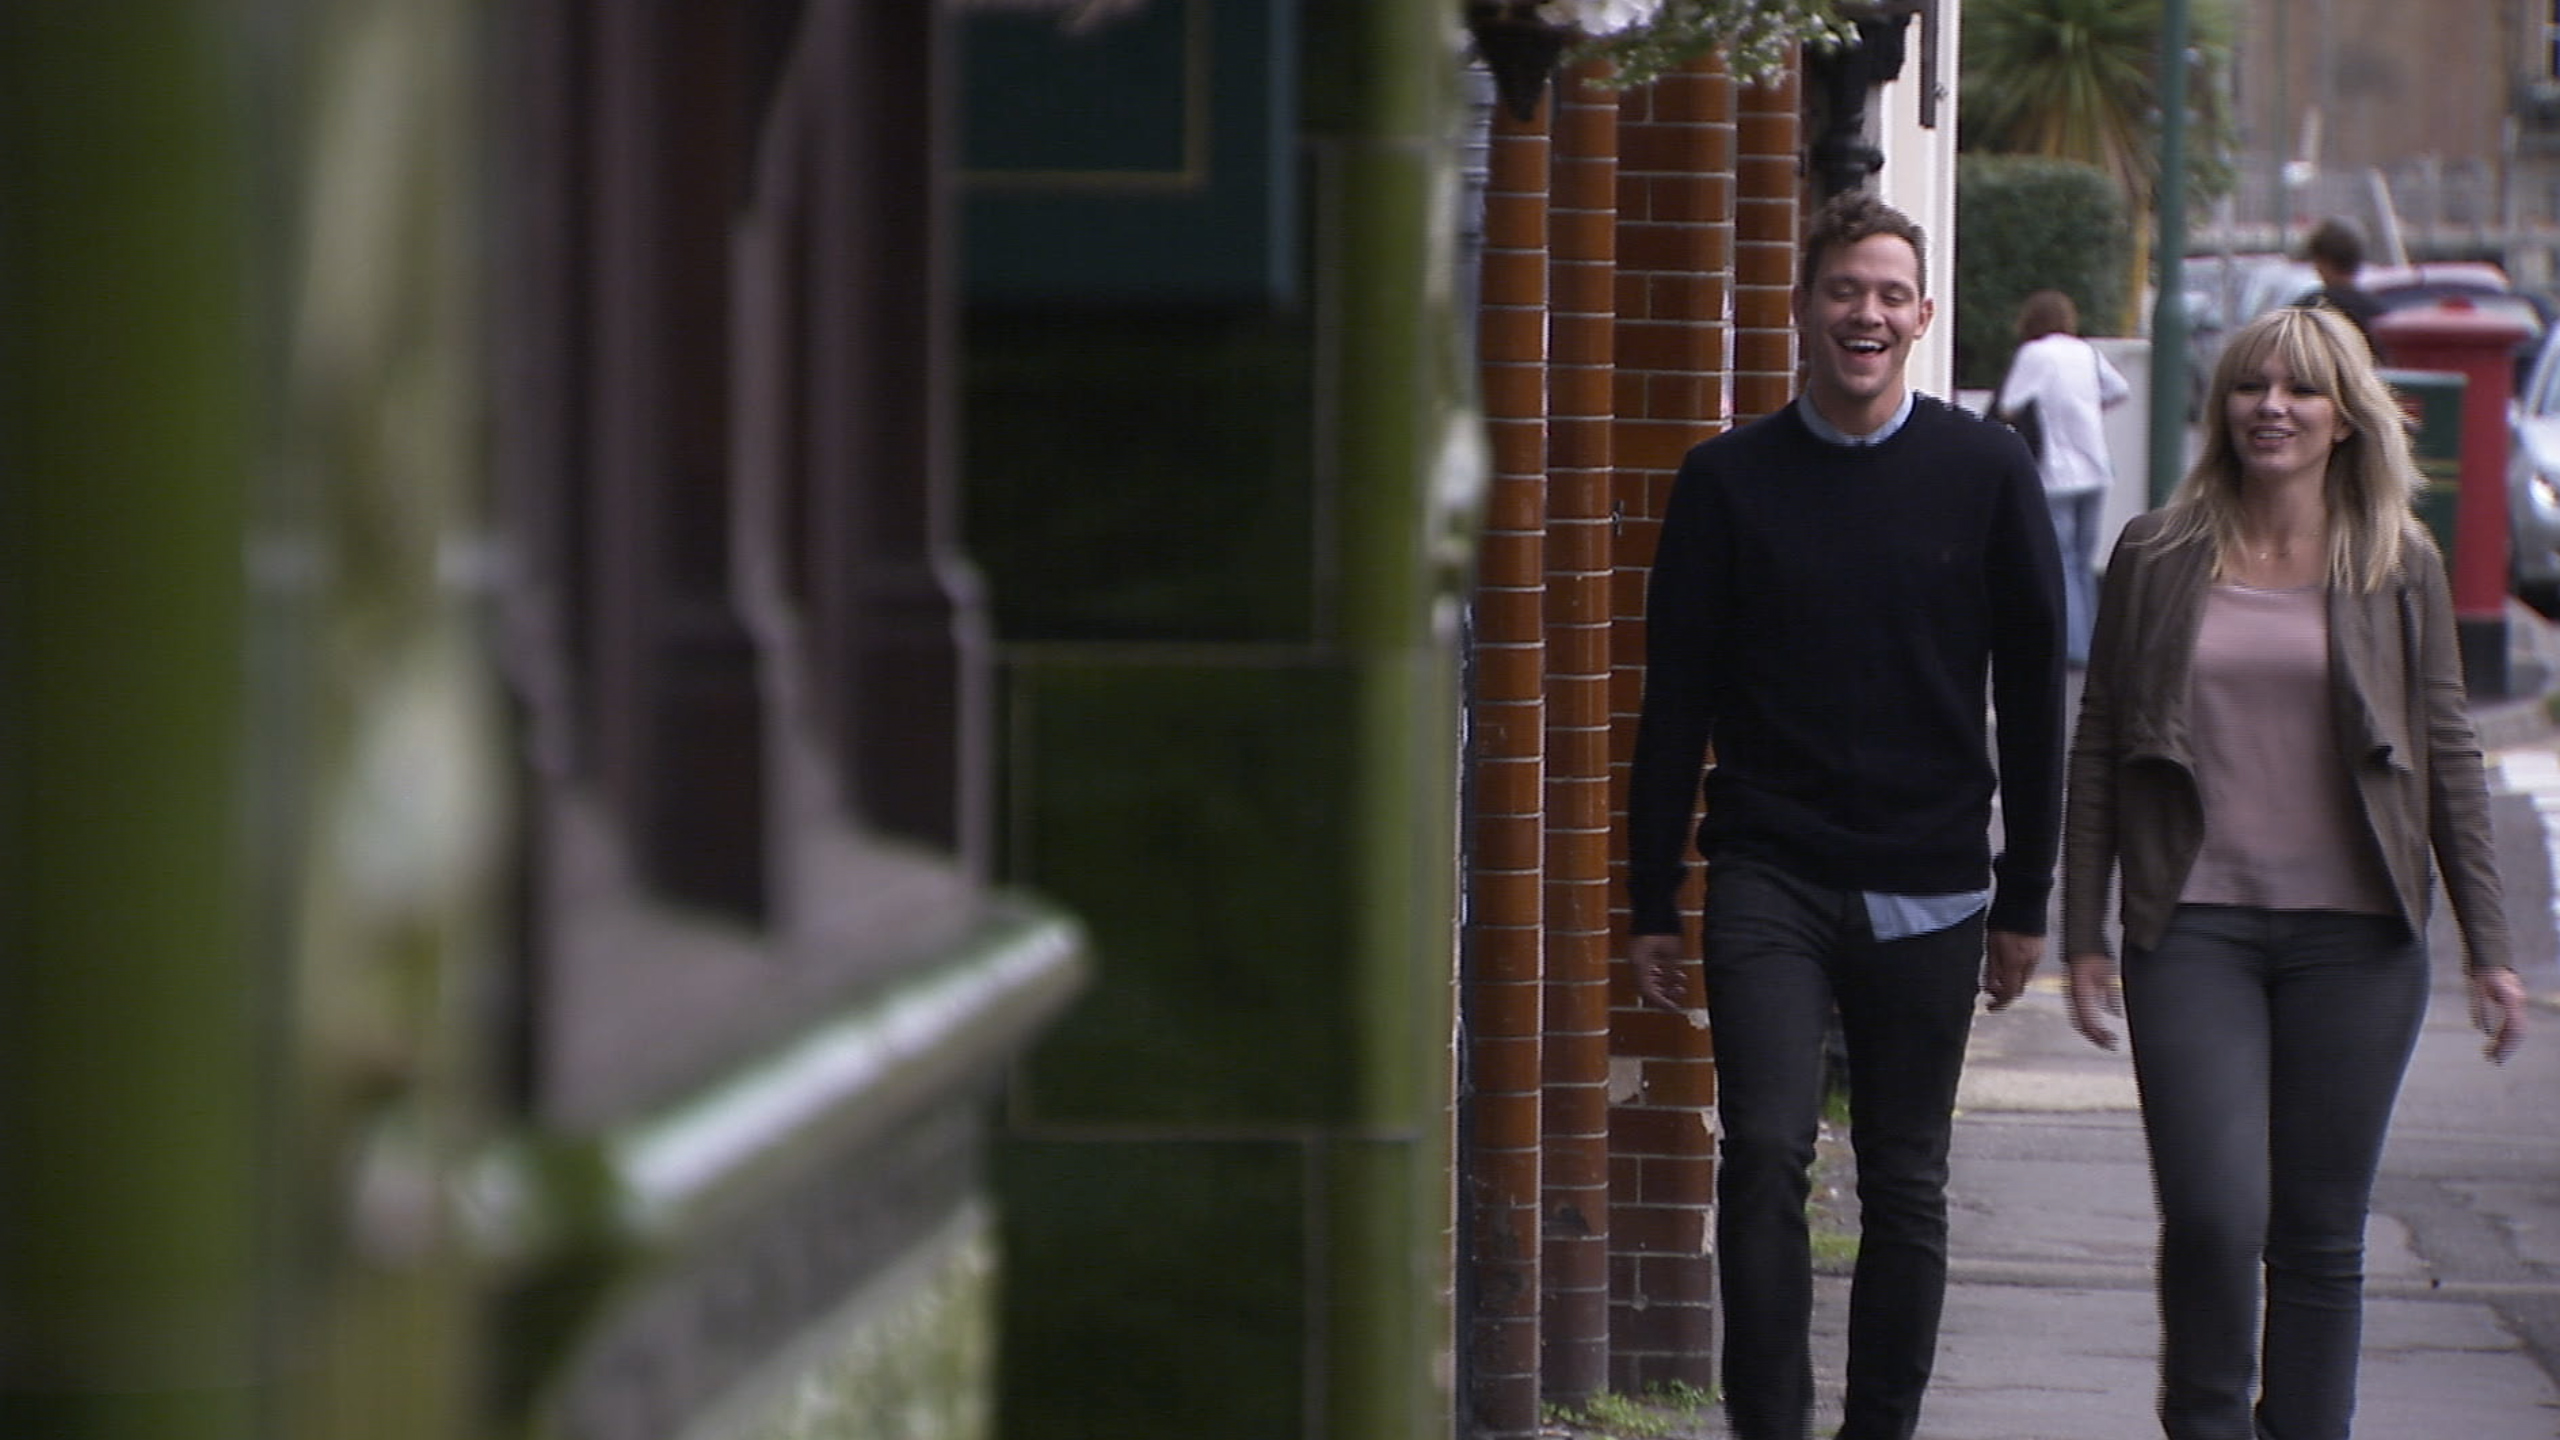 WILL YOUNG ITV SPECIAL